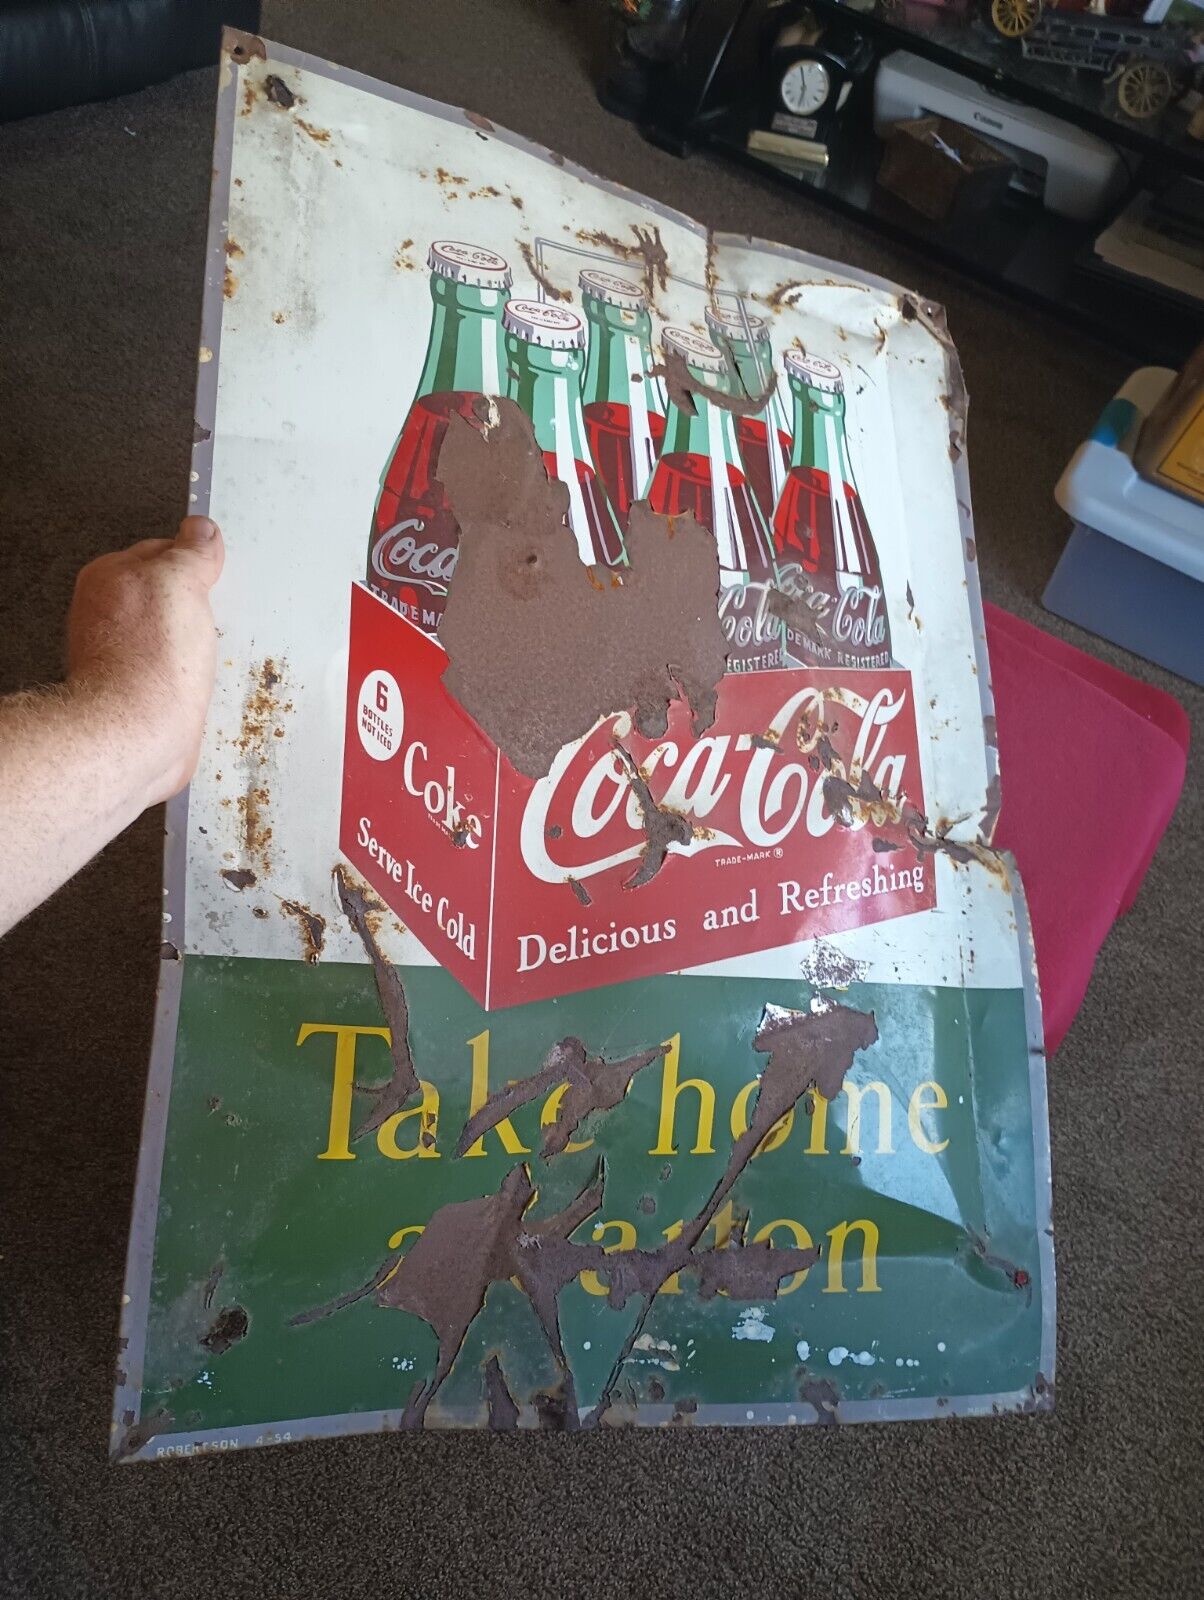 ANTIQUE 1954 COCA COLA SODA ADVERTISING SIGN Uncleaned Barn Fresh 🔥 Rare 6 Pack